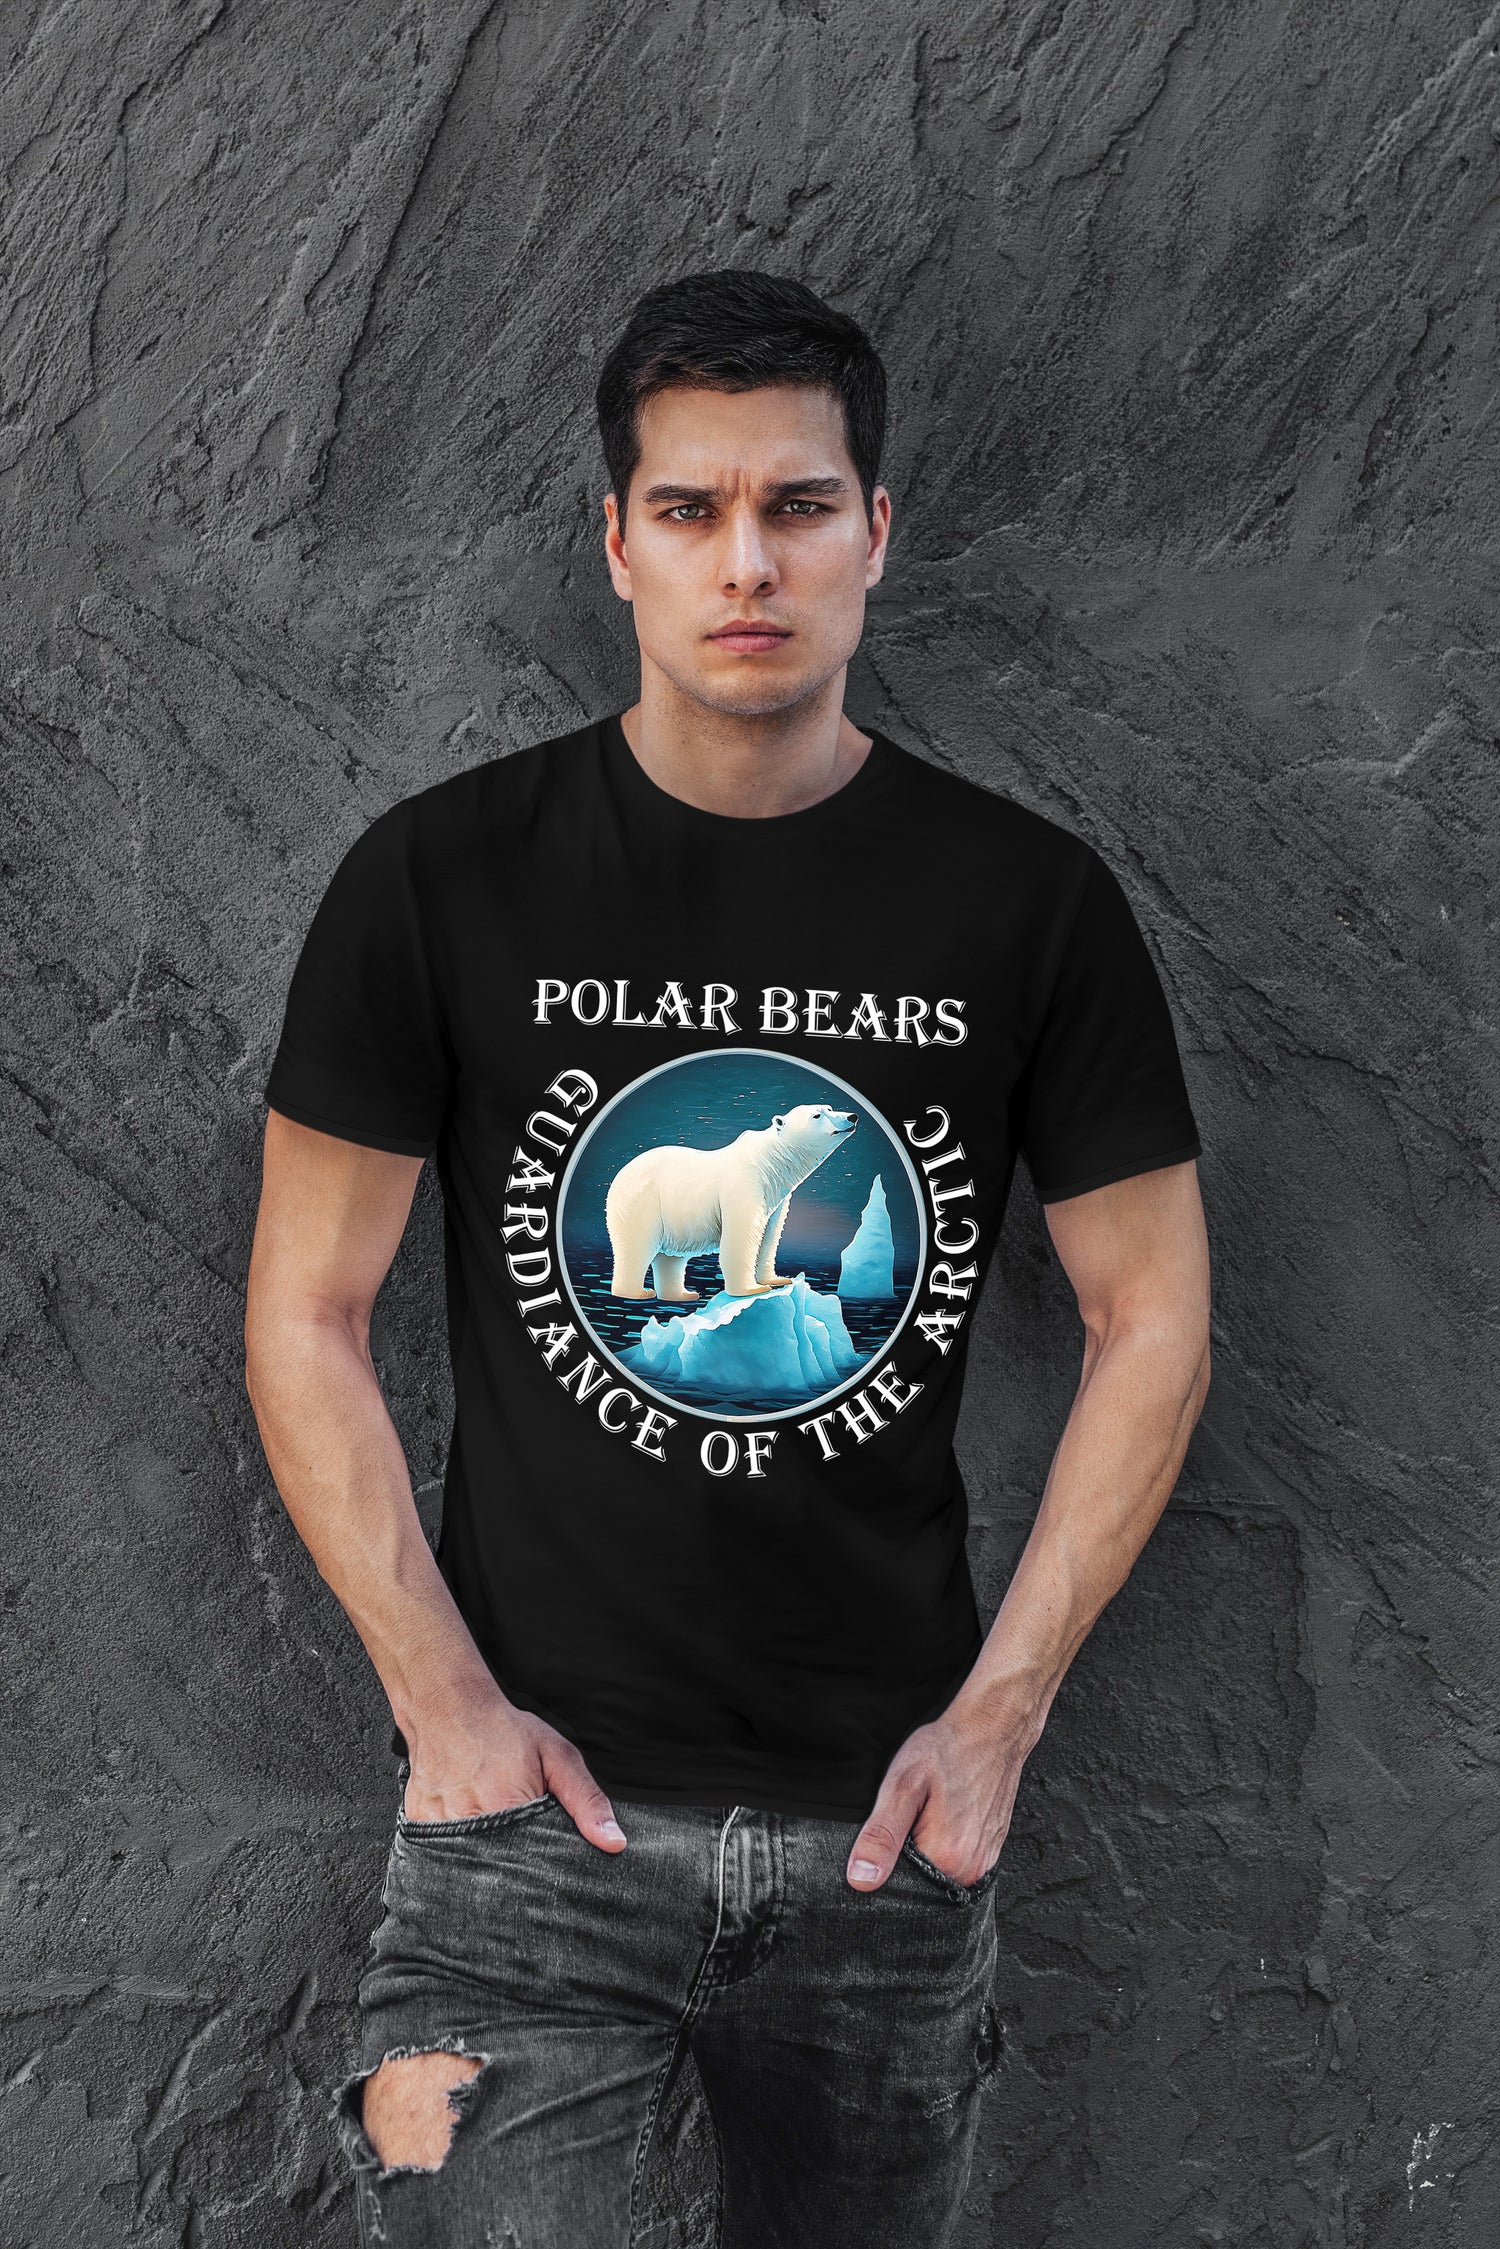 Make a Sustainable Statement with "Do It For The Polar Bears" T-Shirt